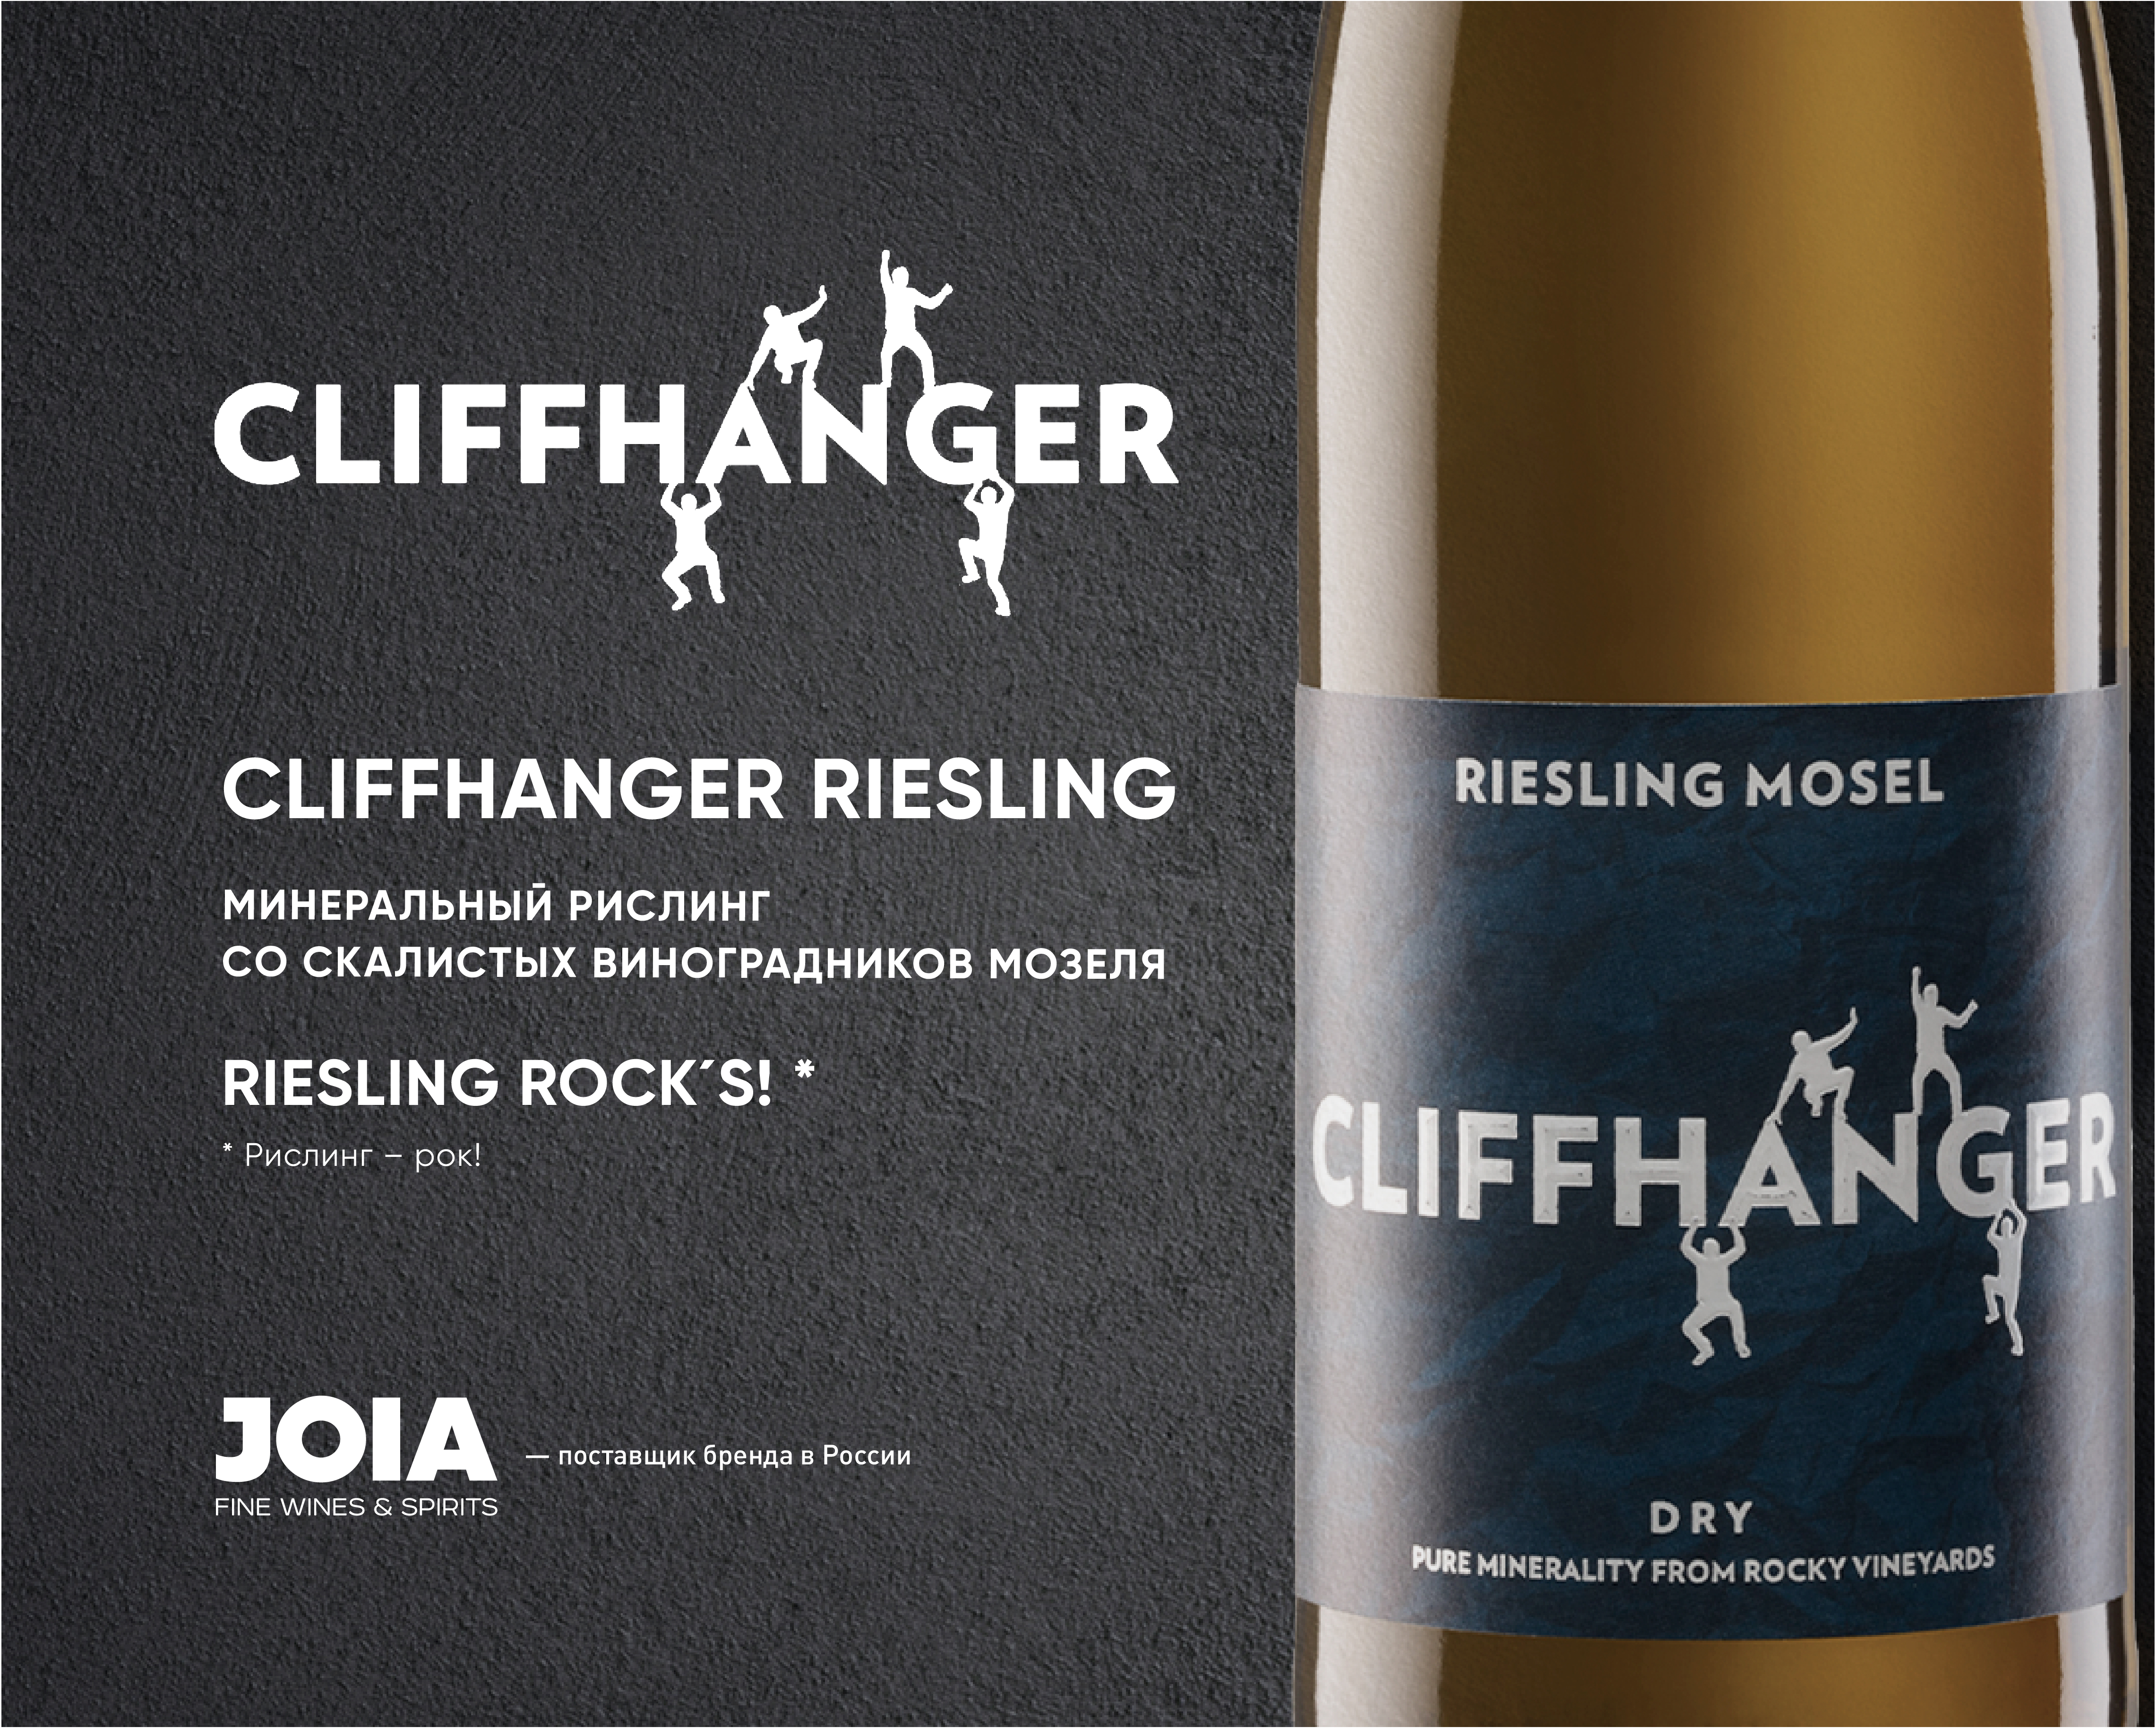 Cliffhanger Riesling